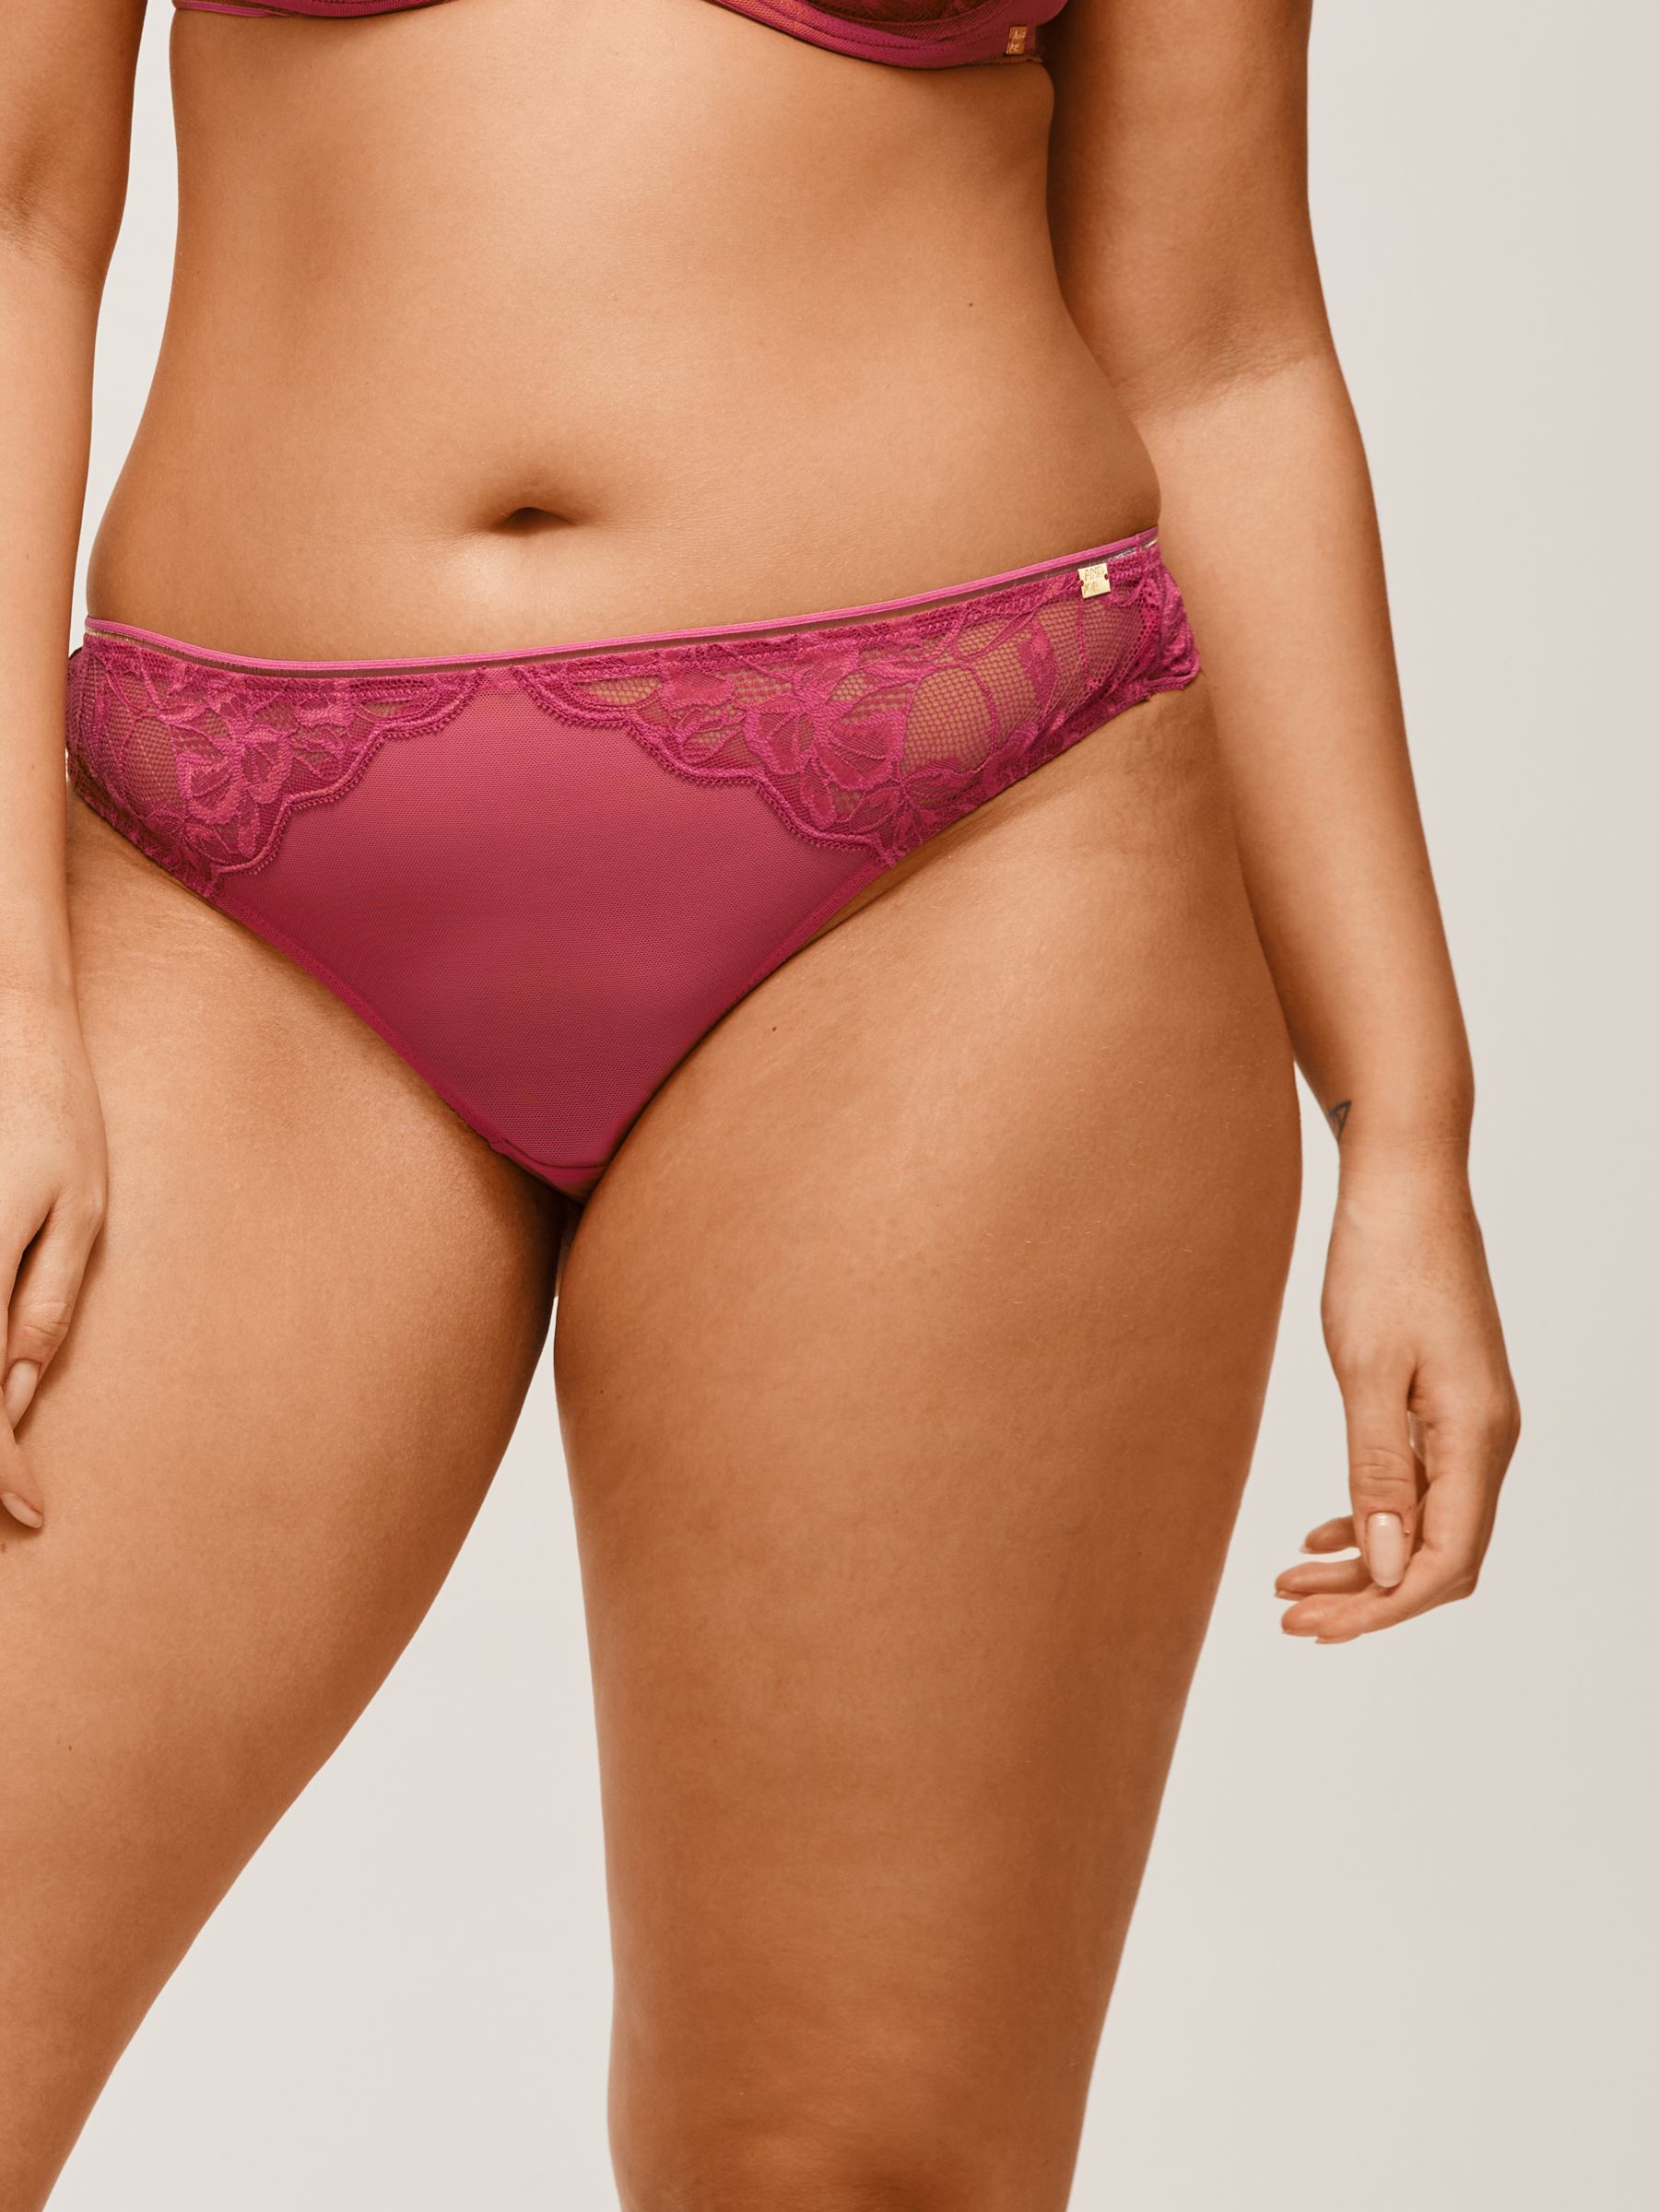 AND/OR Wren Lace Brazilian Knickers, Raspberry